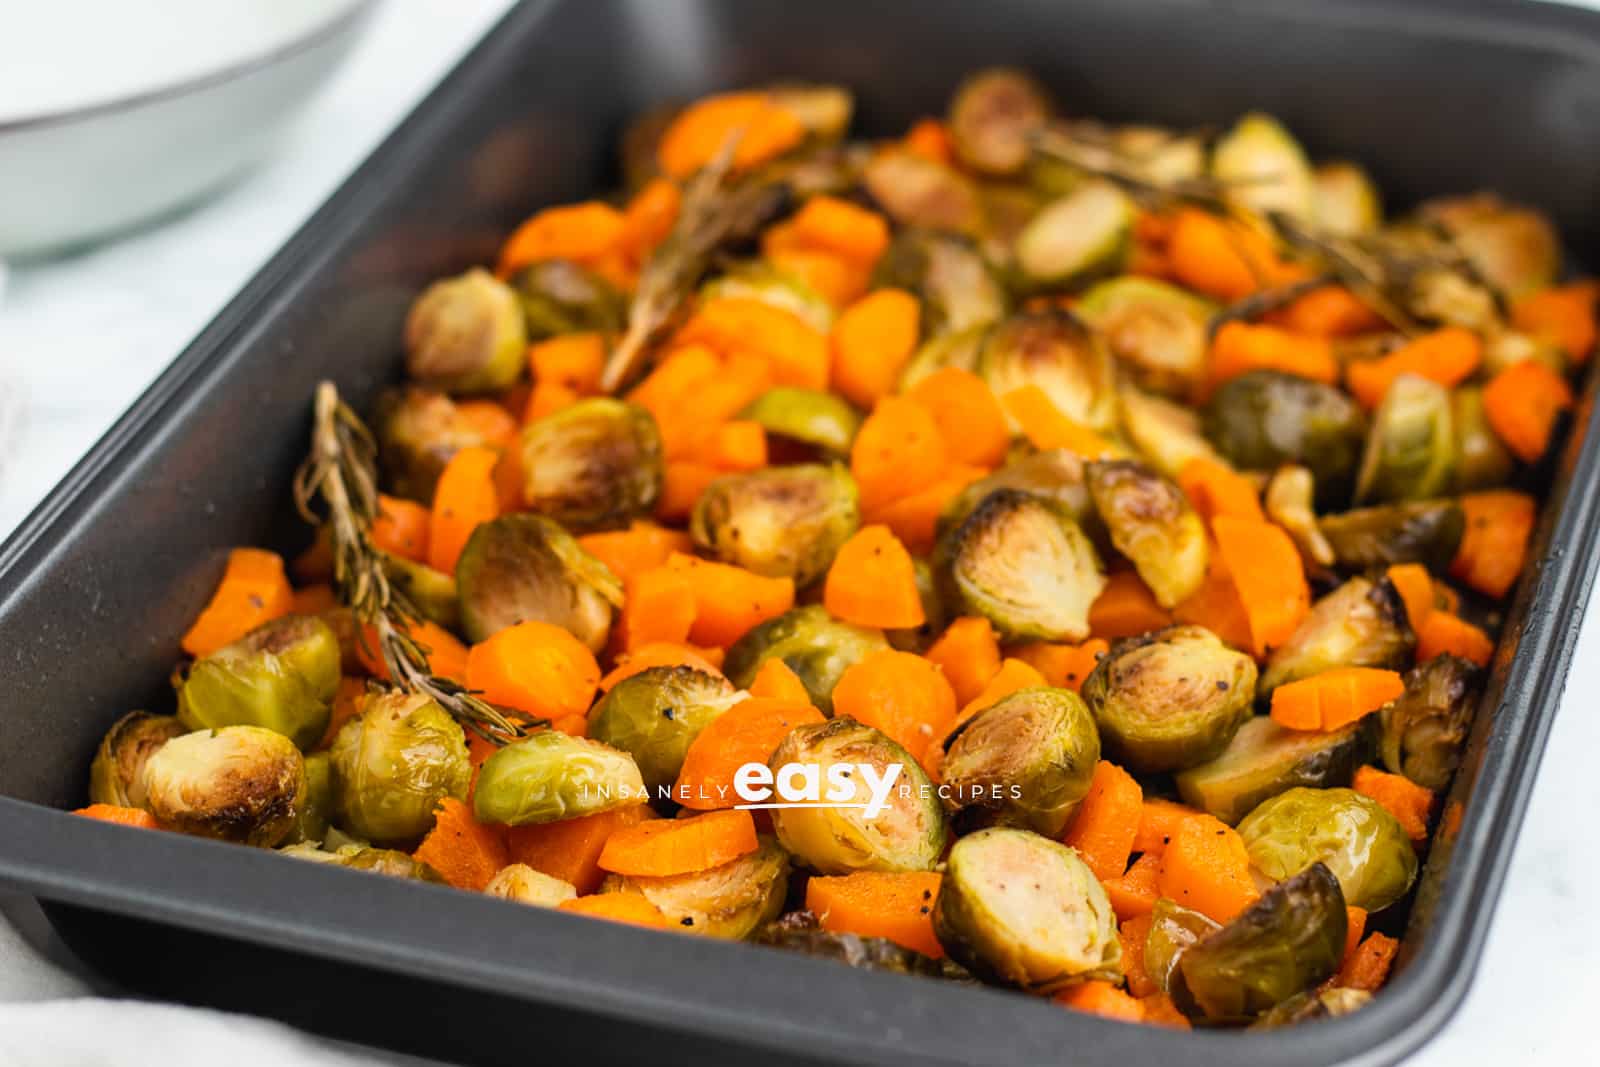 roasted brussel sprouts and carrots in a silver bakng pan